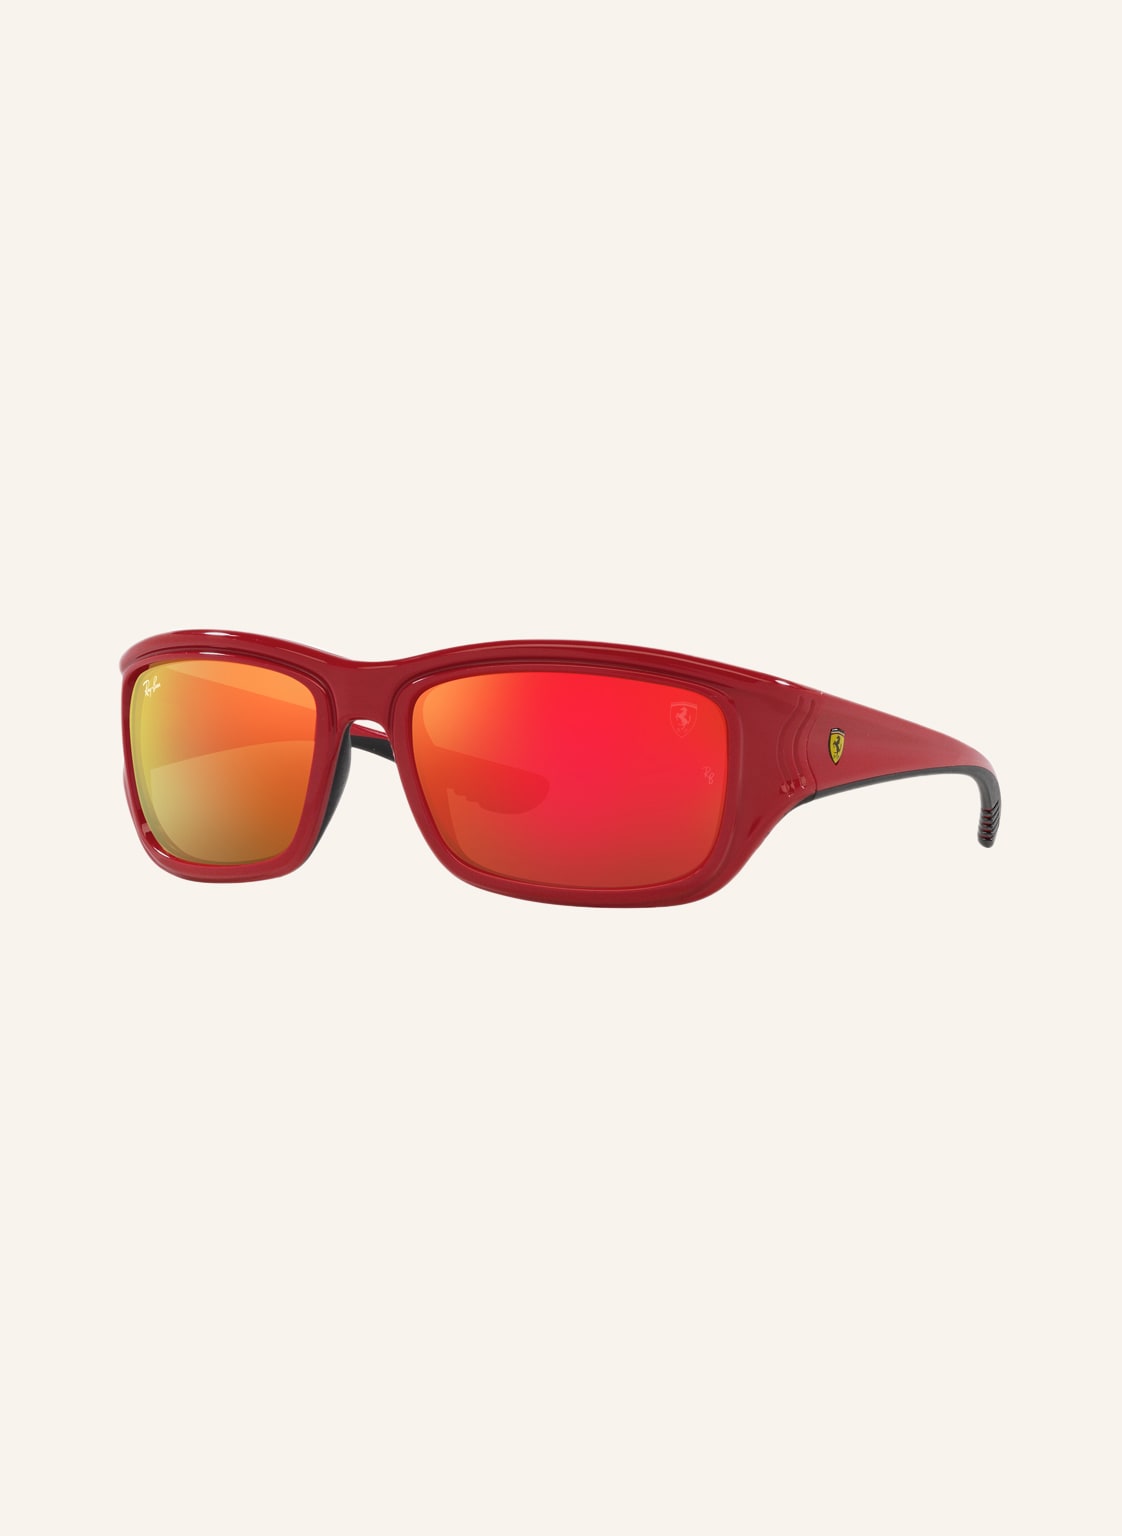 Ray-Ban Sonnenbrille rb4405 rot von Ray-Ban